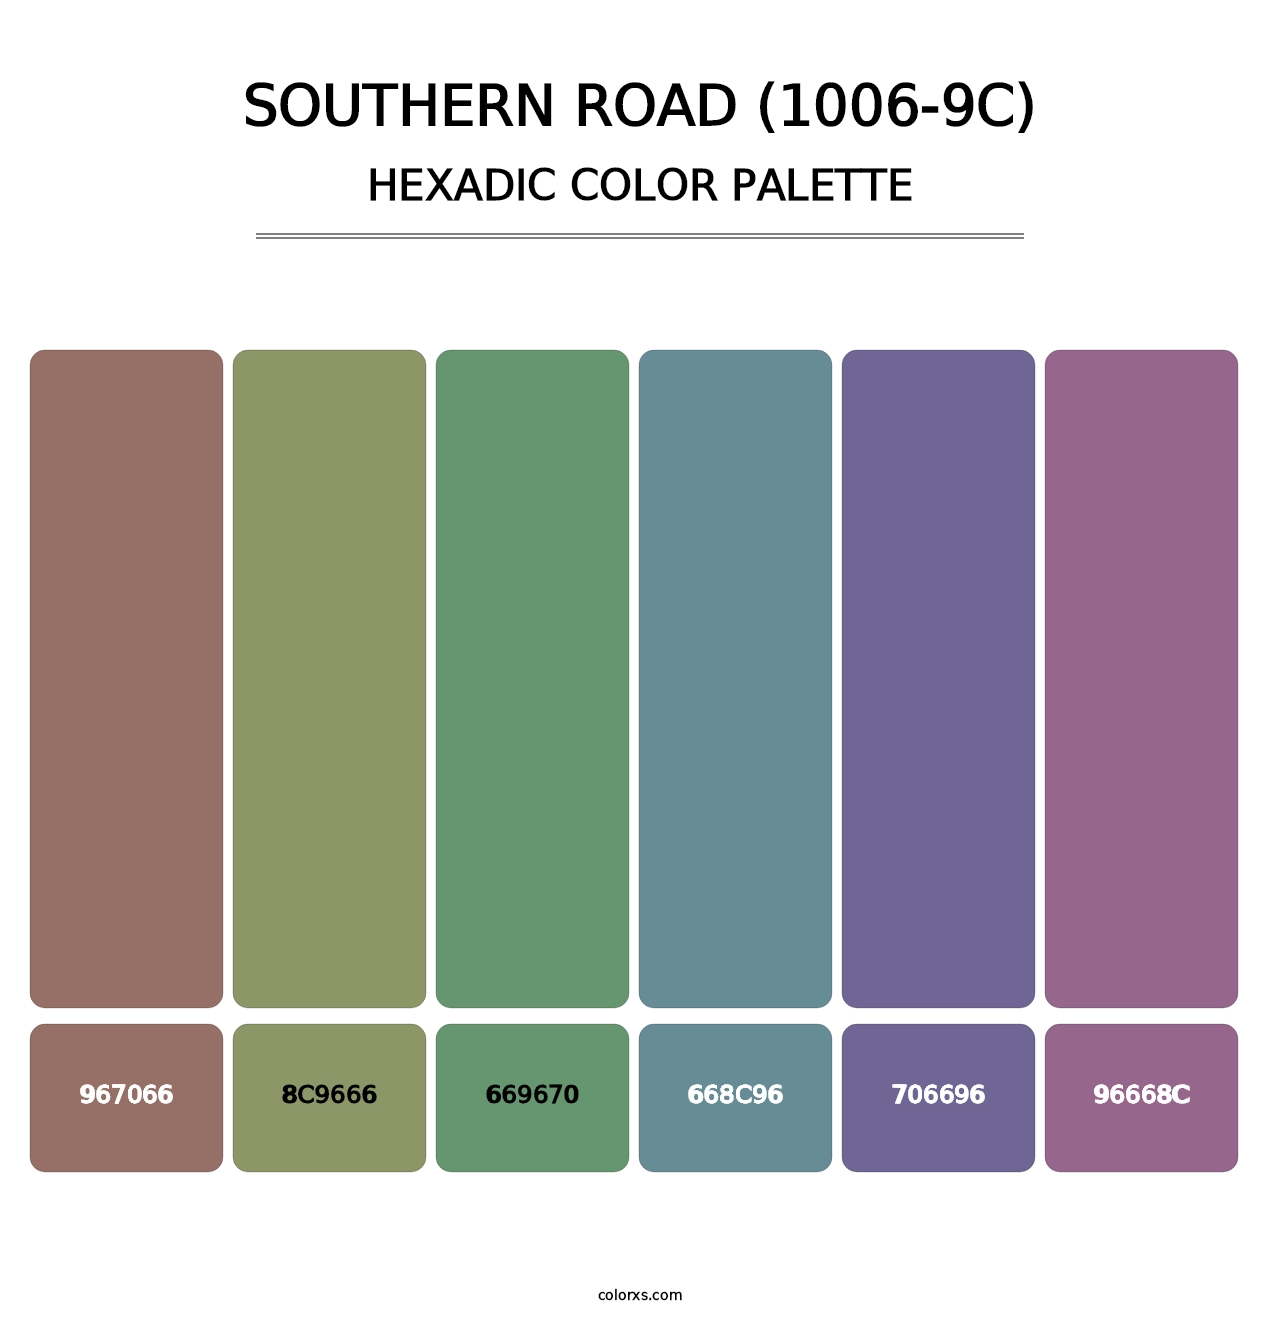 Southern Road (1006-9C) - Hexadic Color Palette